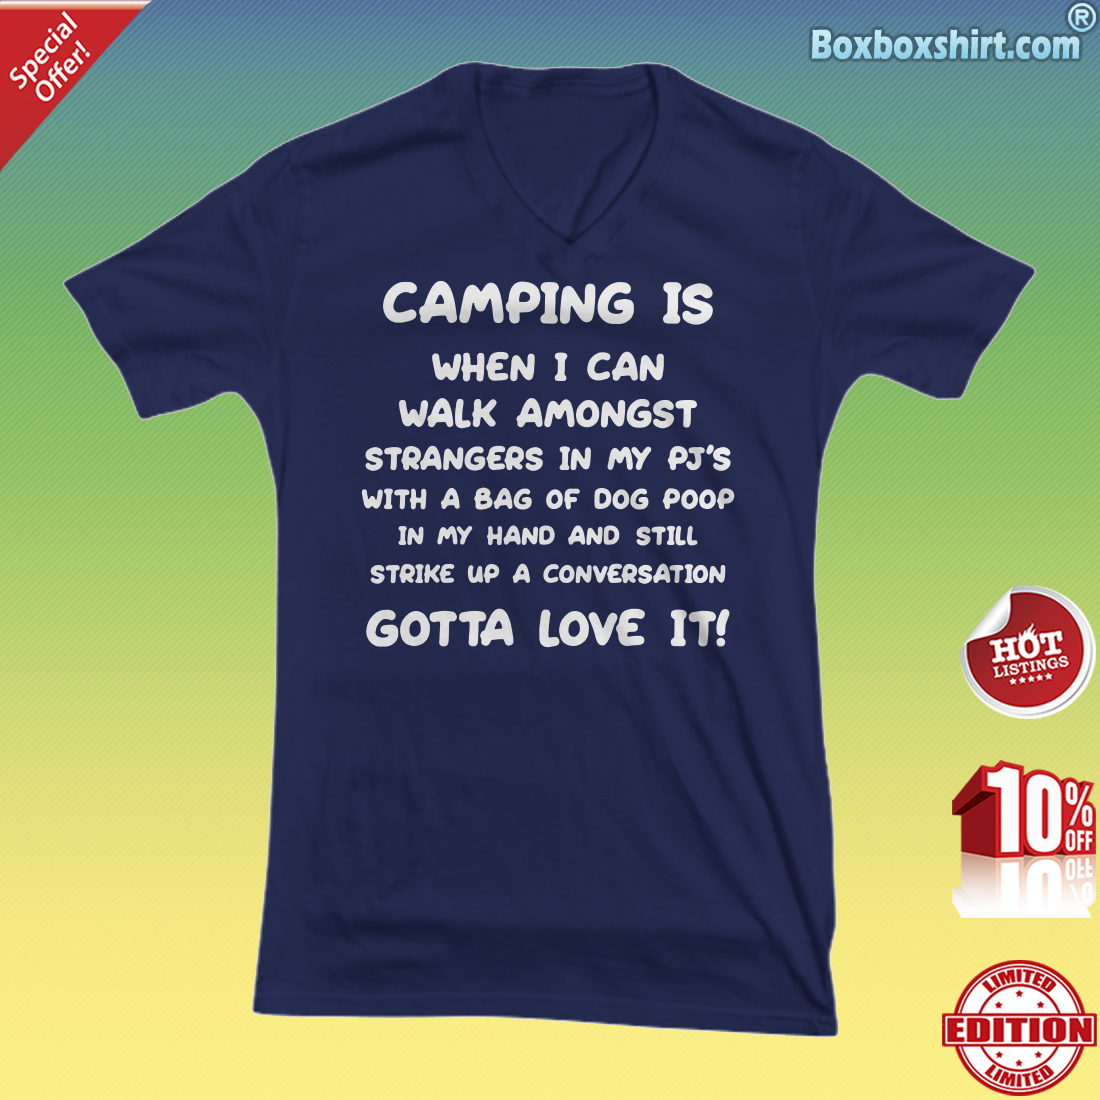 Camping is when i can walk amongst stranger in my PJS with a bag of dog poop V-neck Tee